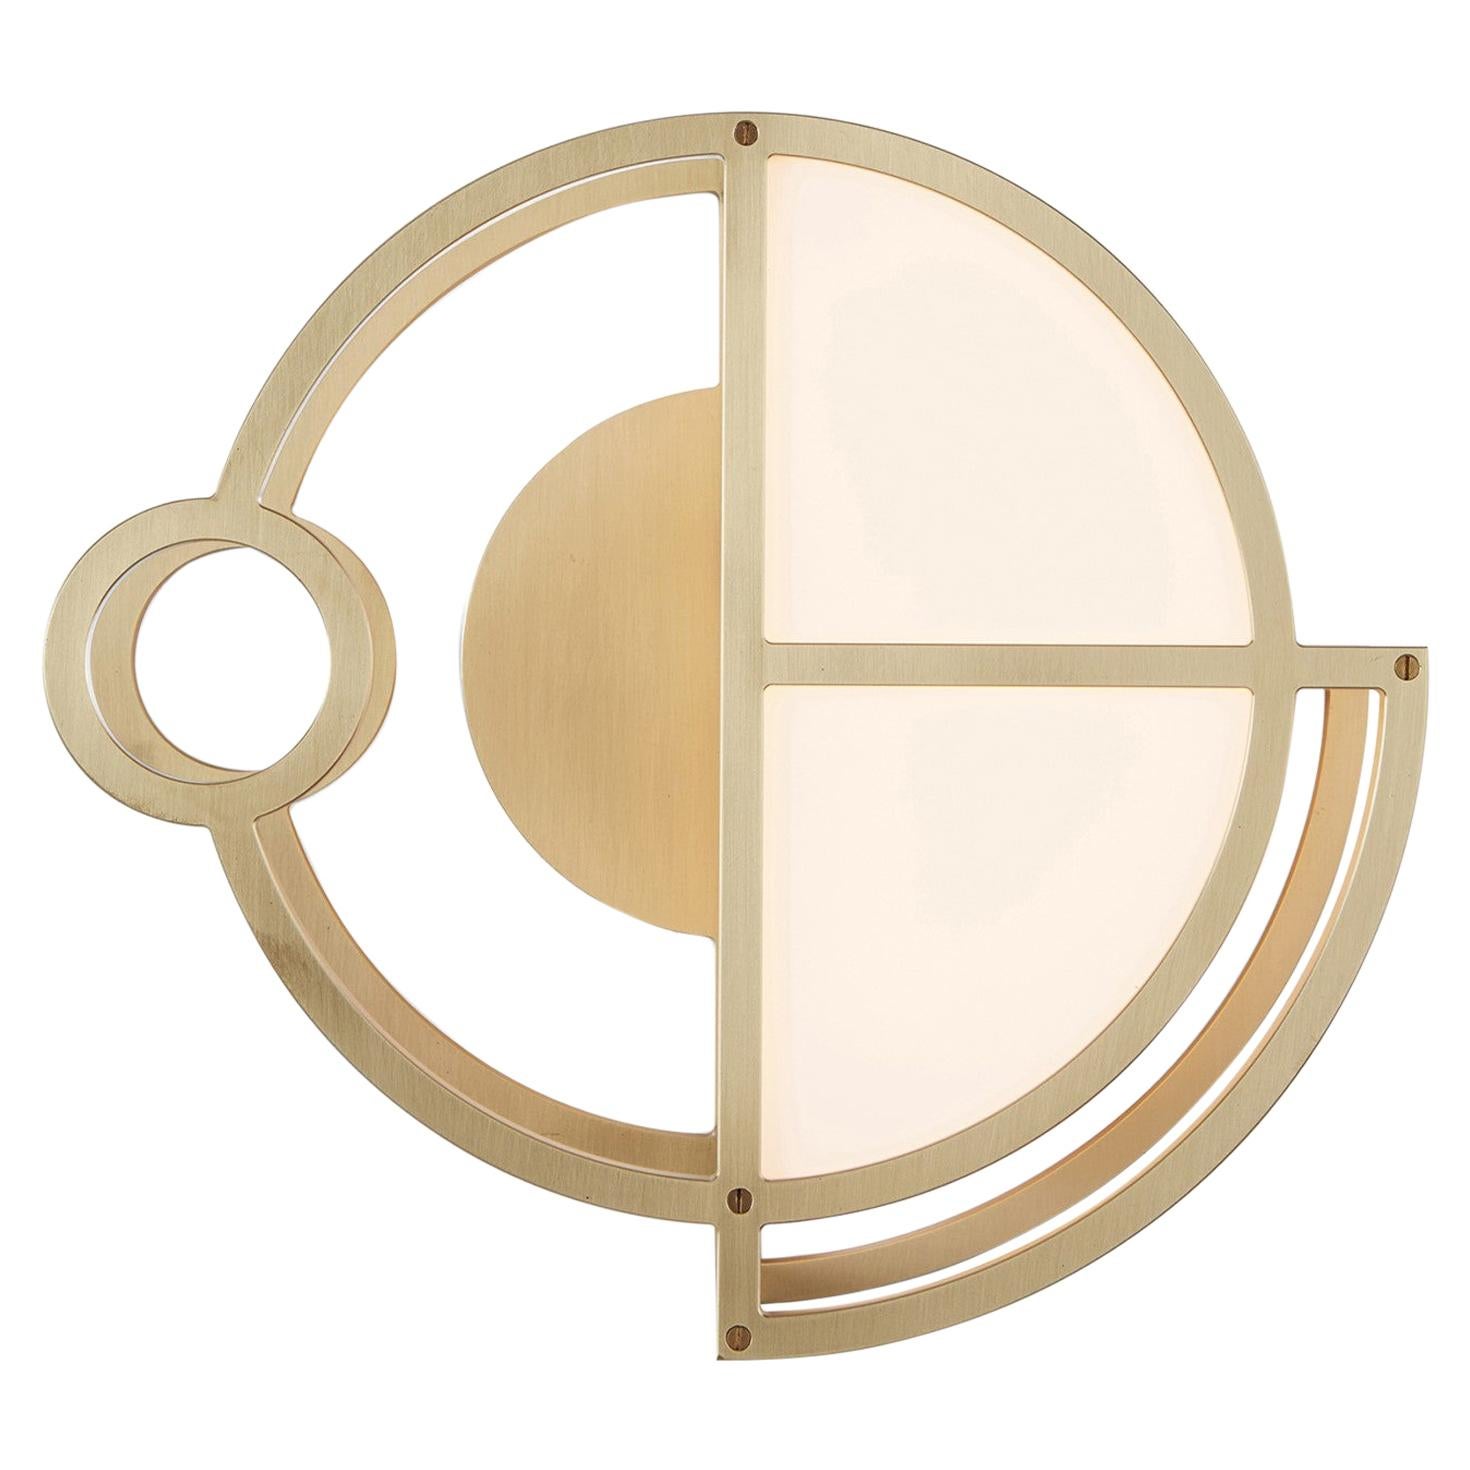 Moonrise Sconce Small, Brushed Brass by Lara Bohinc For Sale